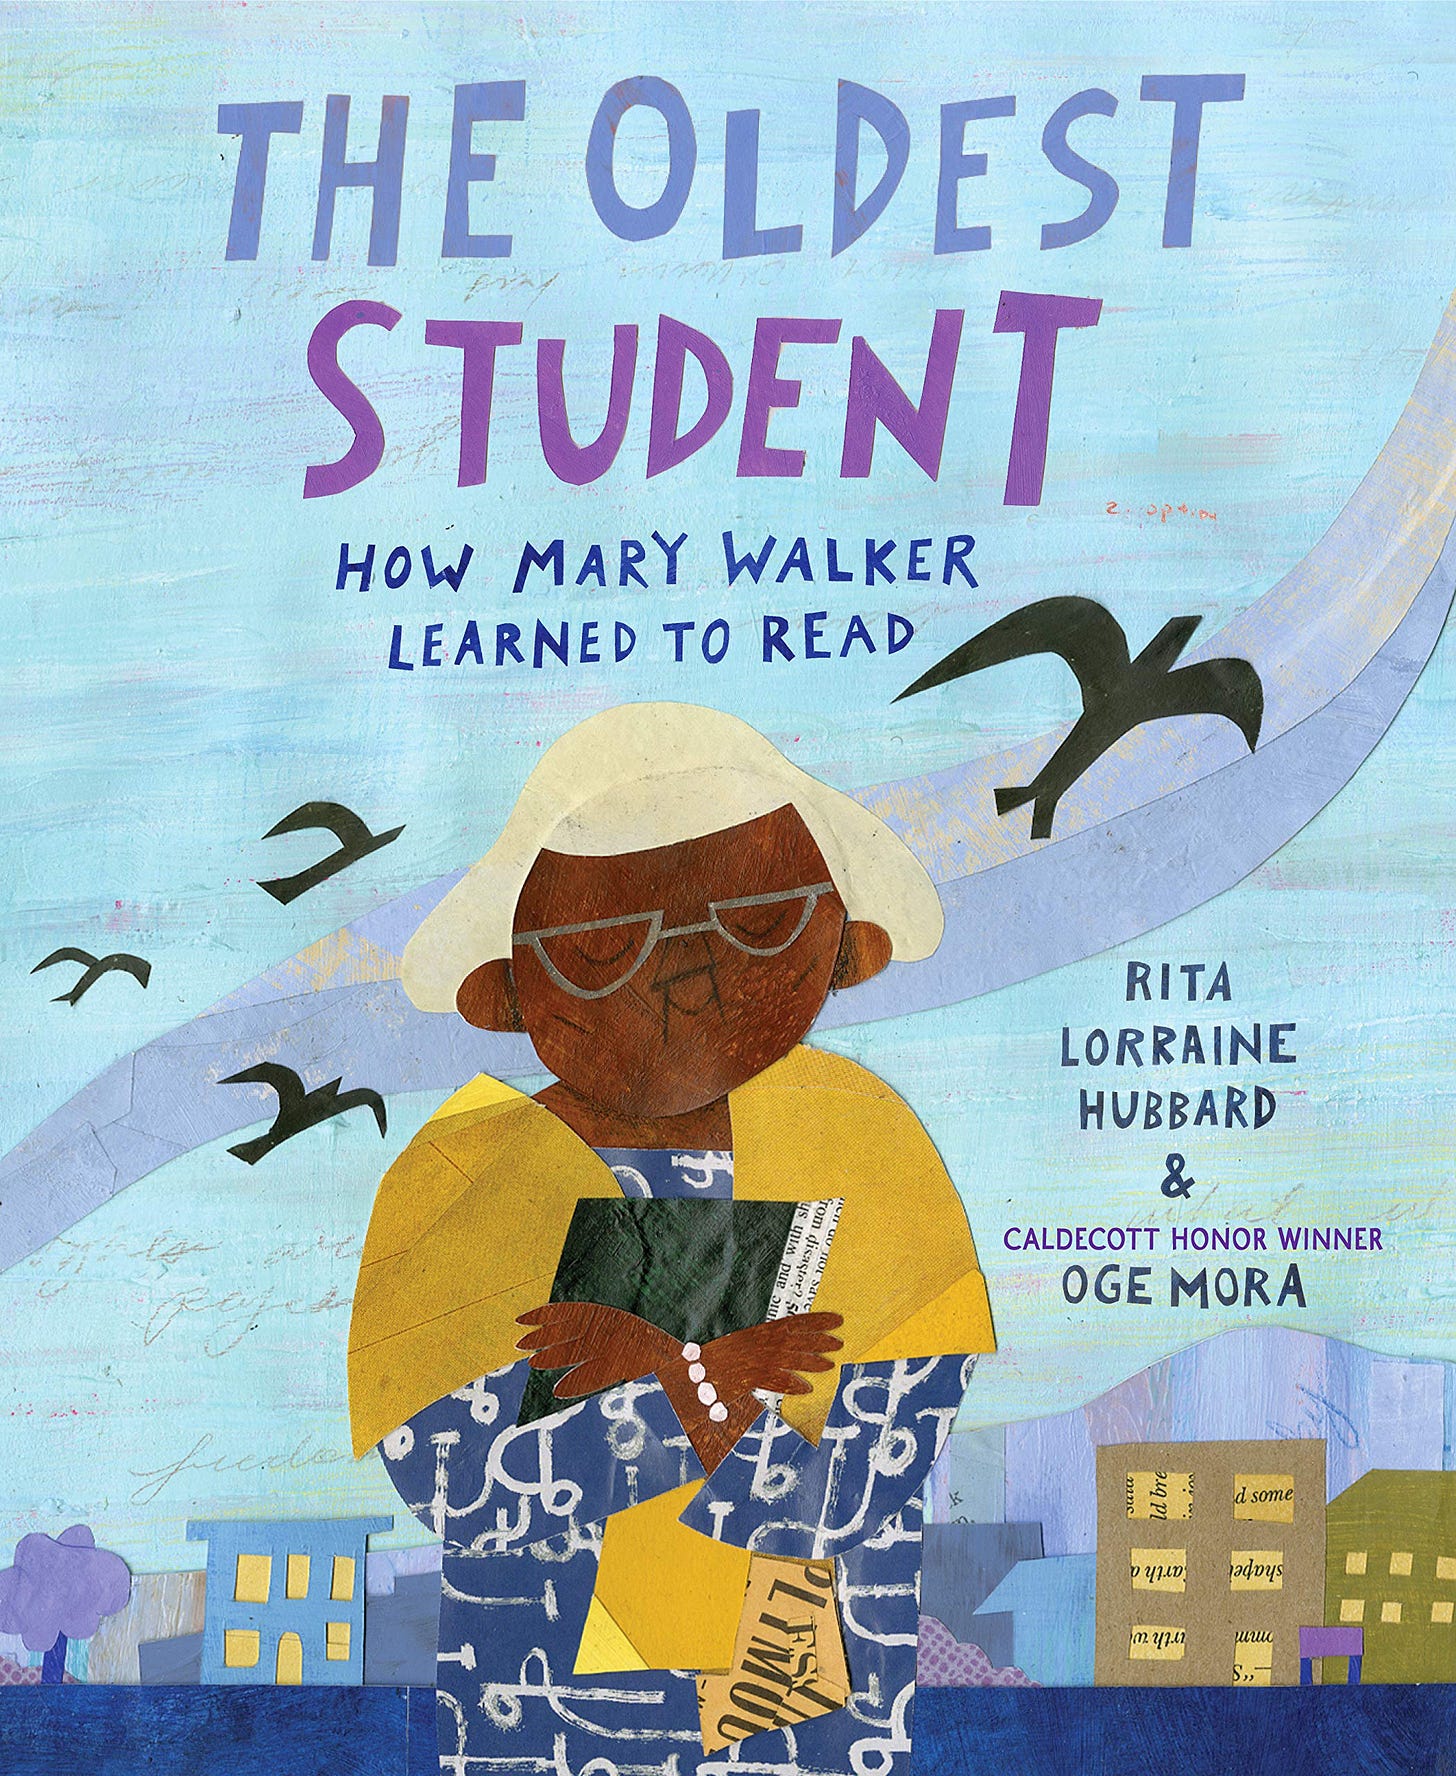 The Oldest Student: How Mary Walker Learned to Read: Hubbard, Rita  Lorraine, Mora, Oge: 9781524768287: Amazon.com: Books